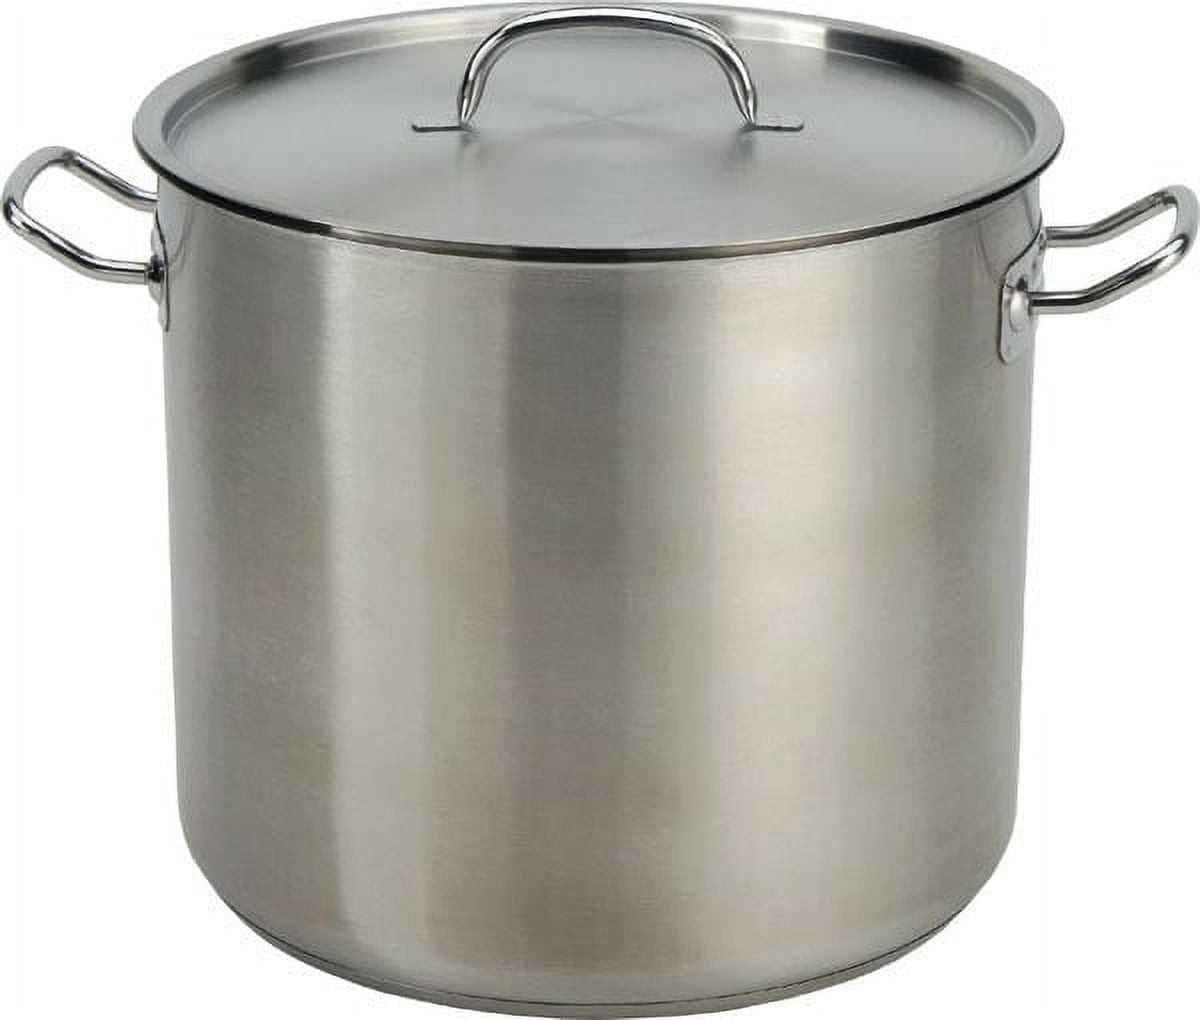 Stockpots Stainless Steel Stock Pot Home Brew Pot Cooking Pot,Clear Water  Level Tick Marks,5 Cm / 12 Litre (Color : Silver, Size : 35cm35cm(37L))